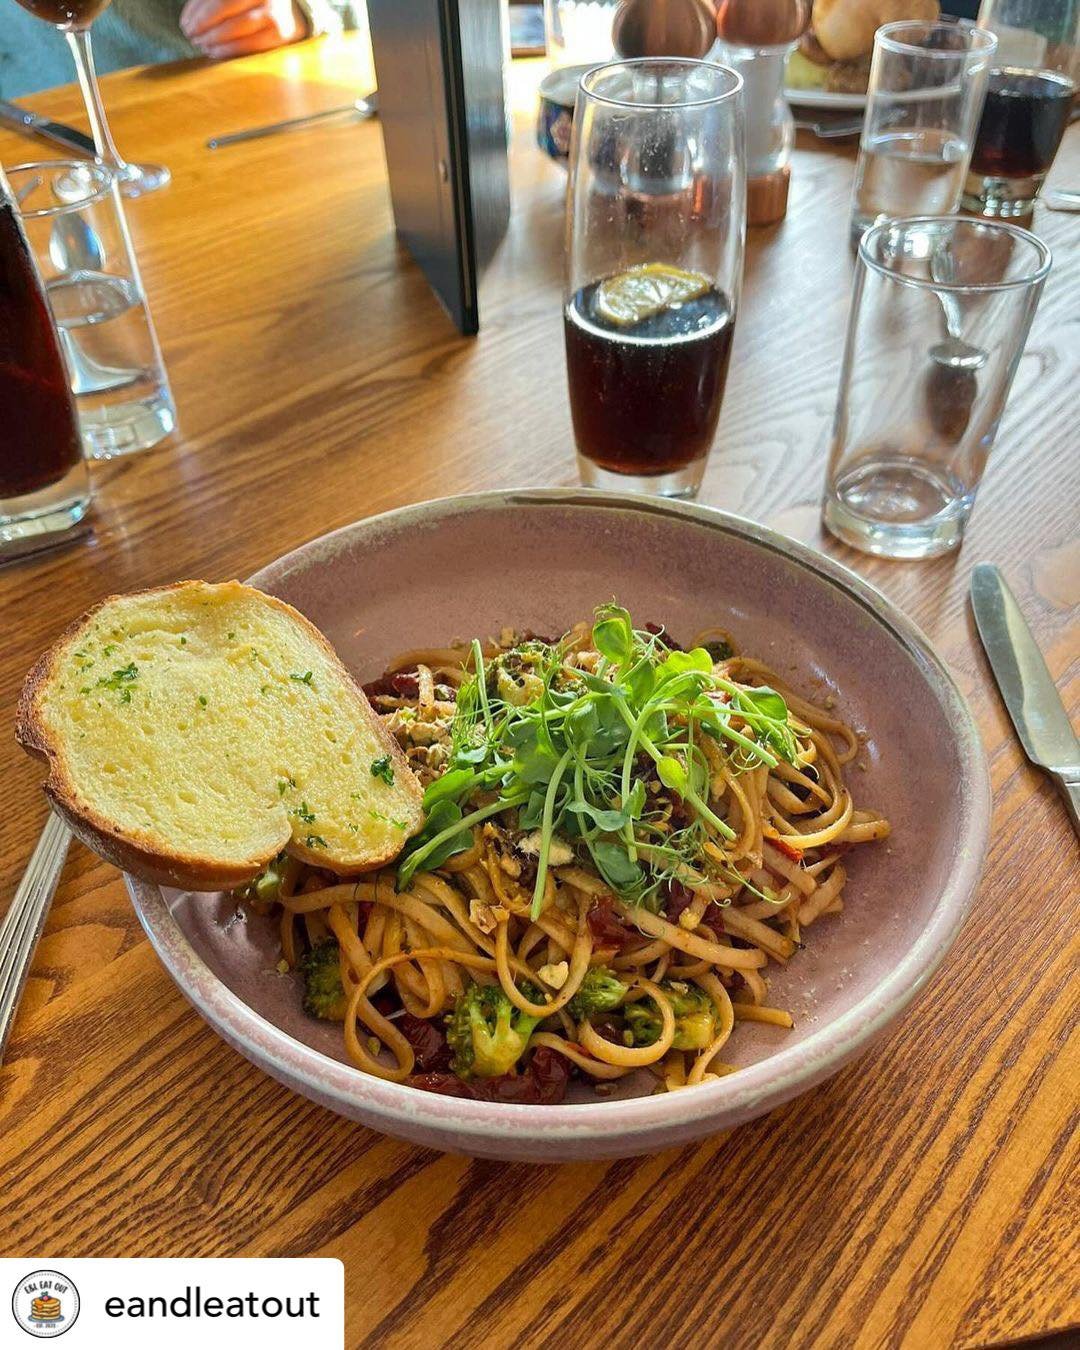 Another lovely share! We absolutely love hearing what you all think about your experience at Saplinbrae, thanks for sharing🥰 @eandleatout

&ldquo;What a lovely time we had, amazing setting and delicious food!! 

The menu changes weekly (I think) but